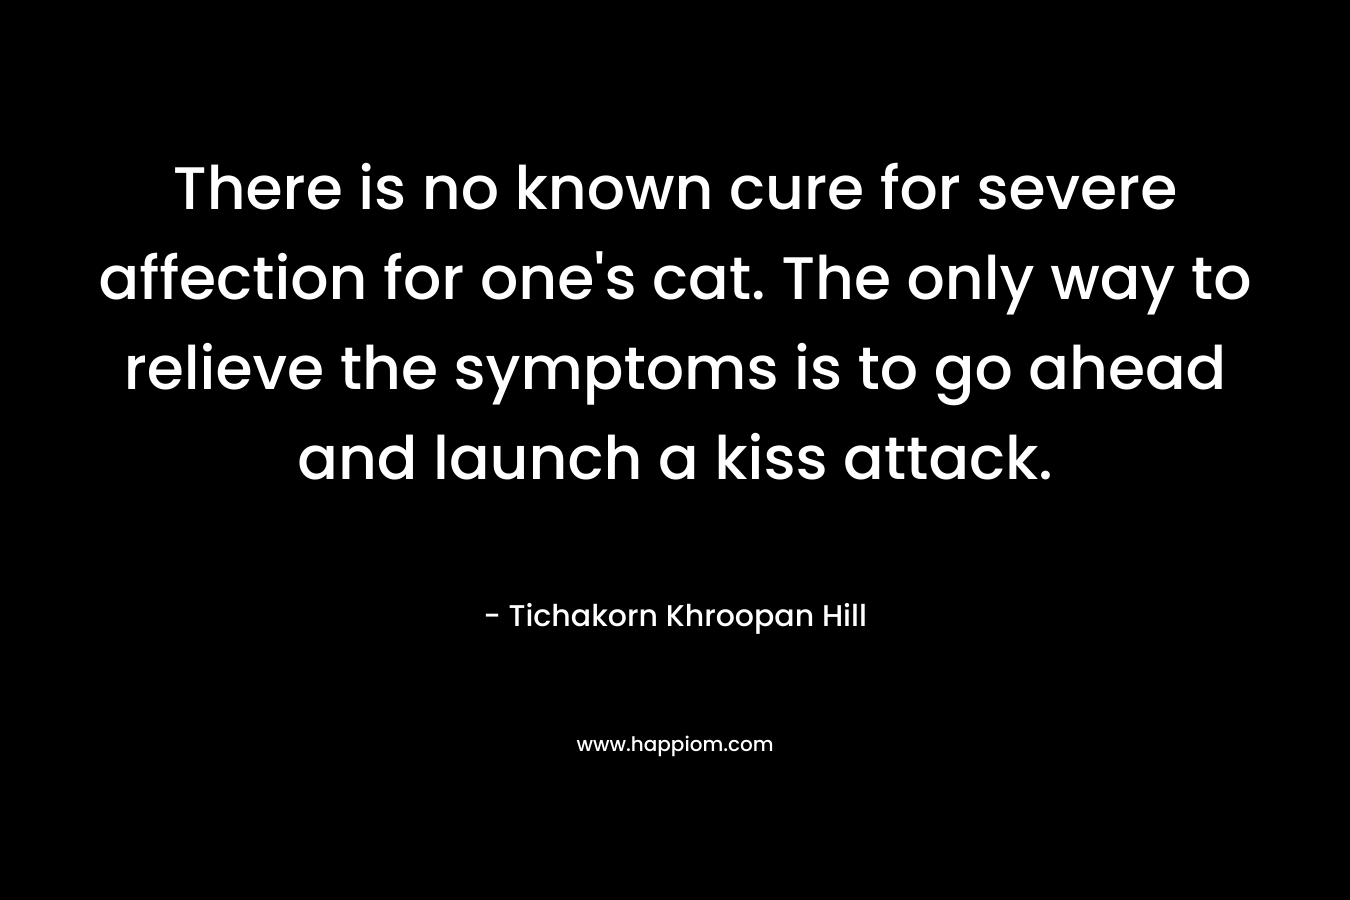 There is no known cure for severe affection for one’s cat. The only way to relieve the symptoms is to go ahead and launch a kiss attack. – Tichakorn Khroopan Hill